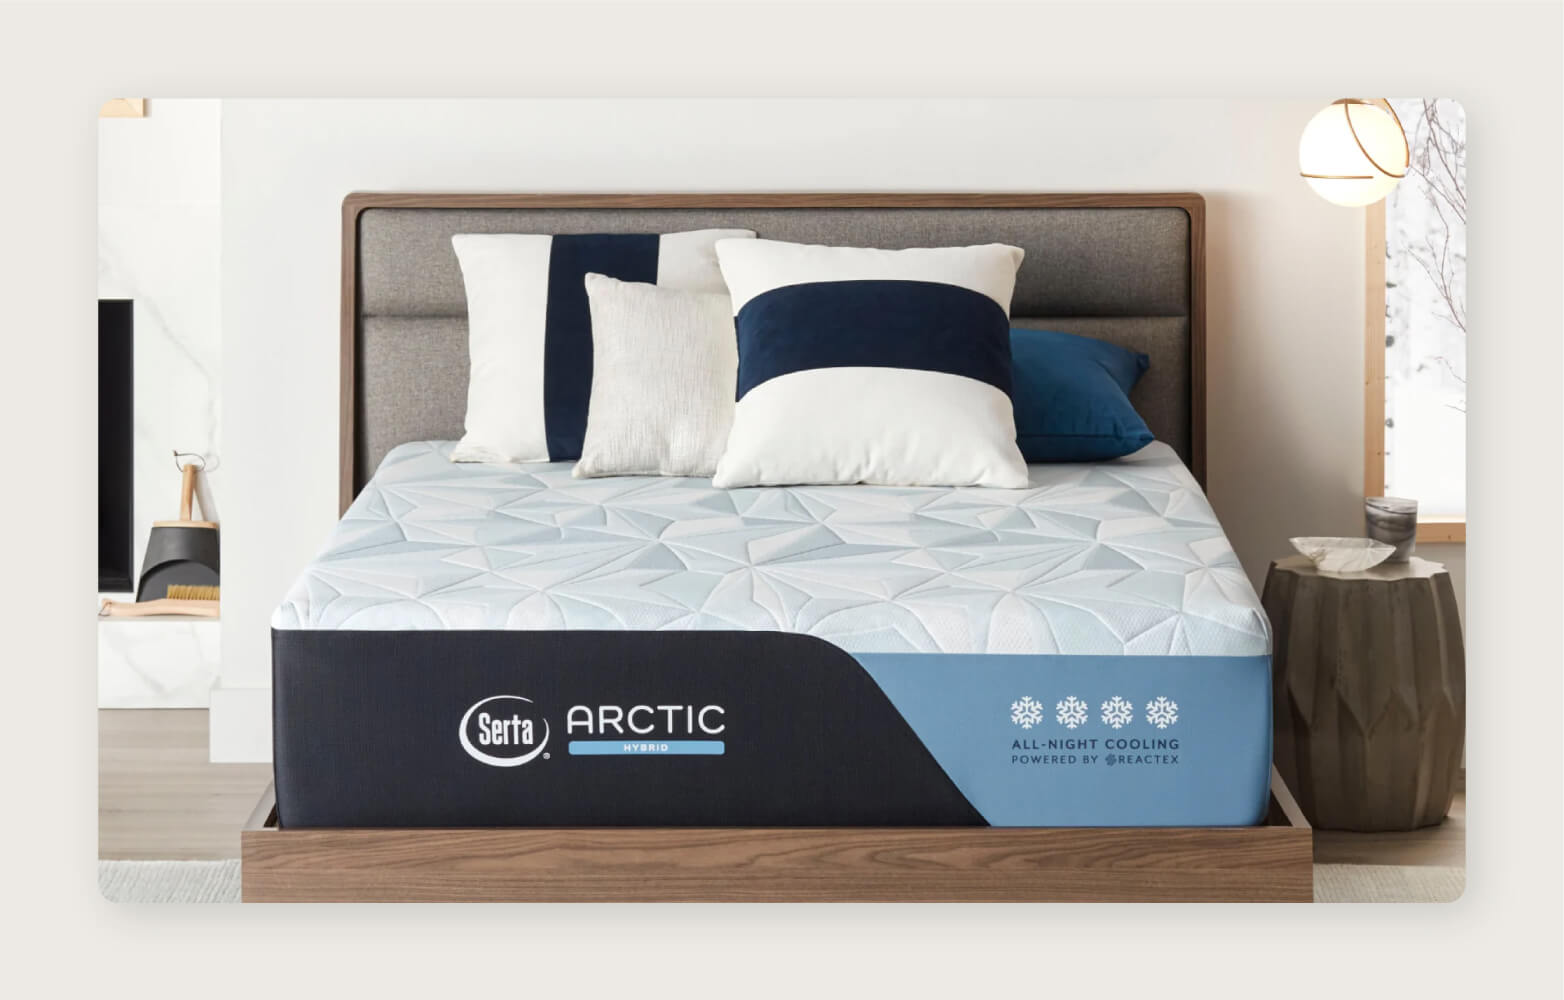 A Serta Arctic Hybrid Mattress with pillows on a wood bed frame in a bright white bedroom with wood accents.